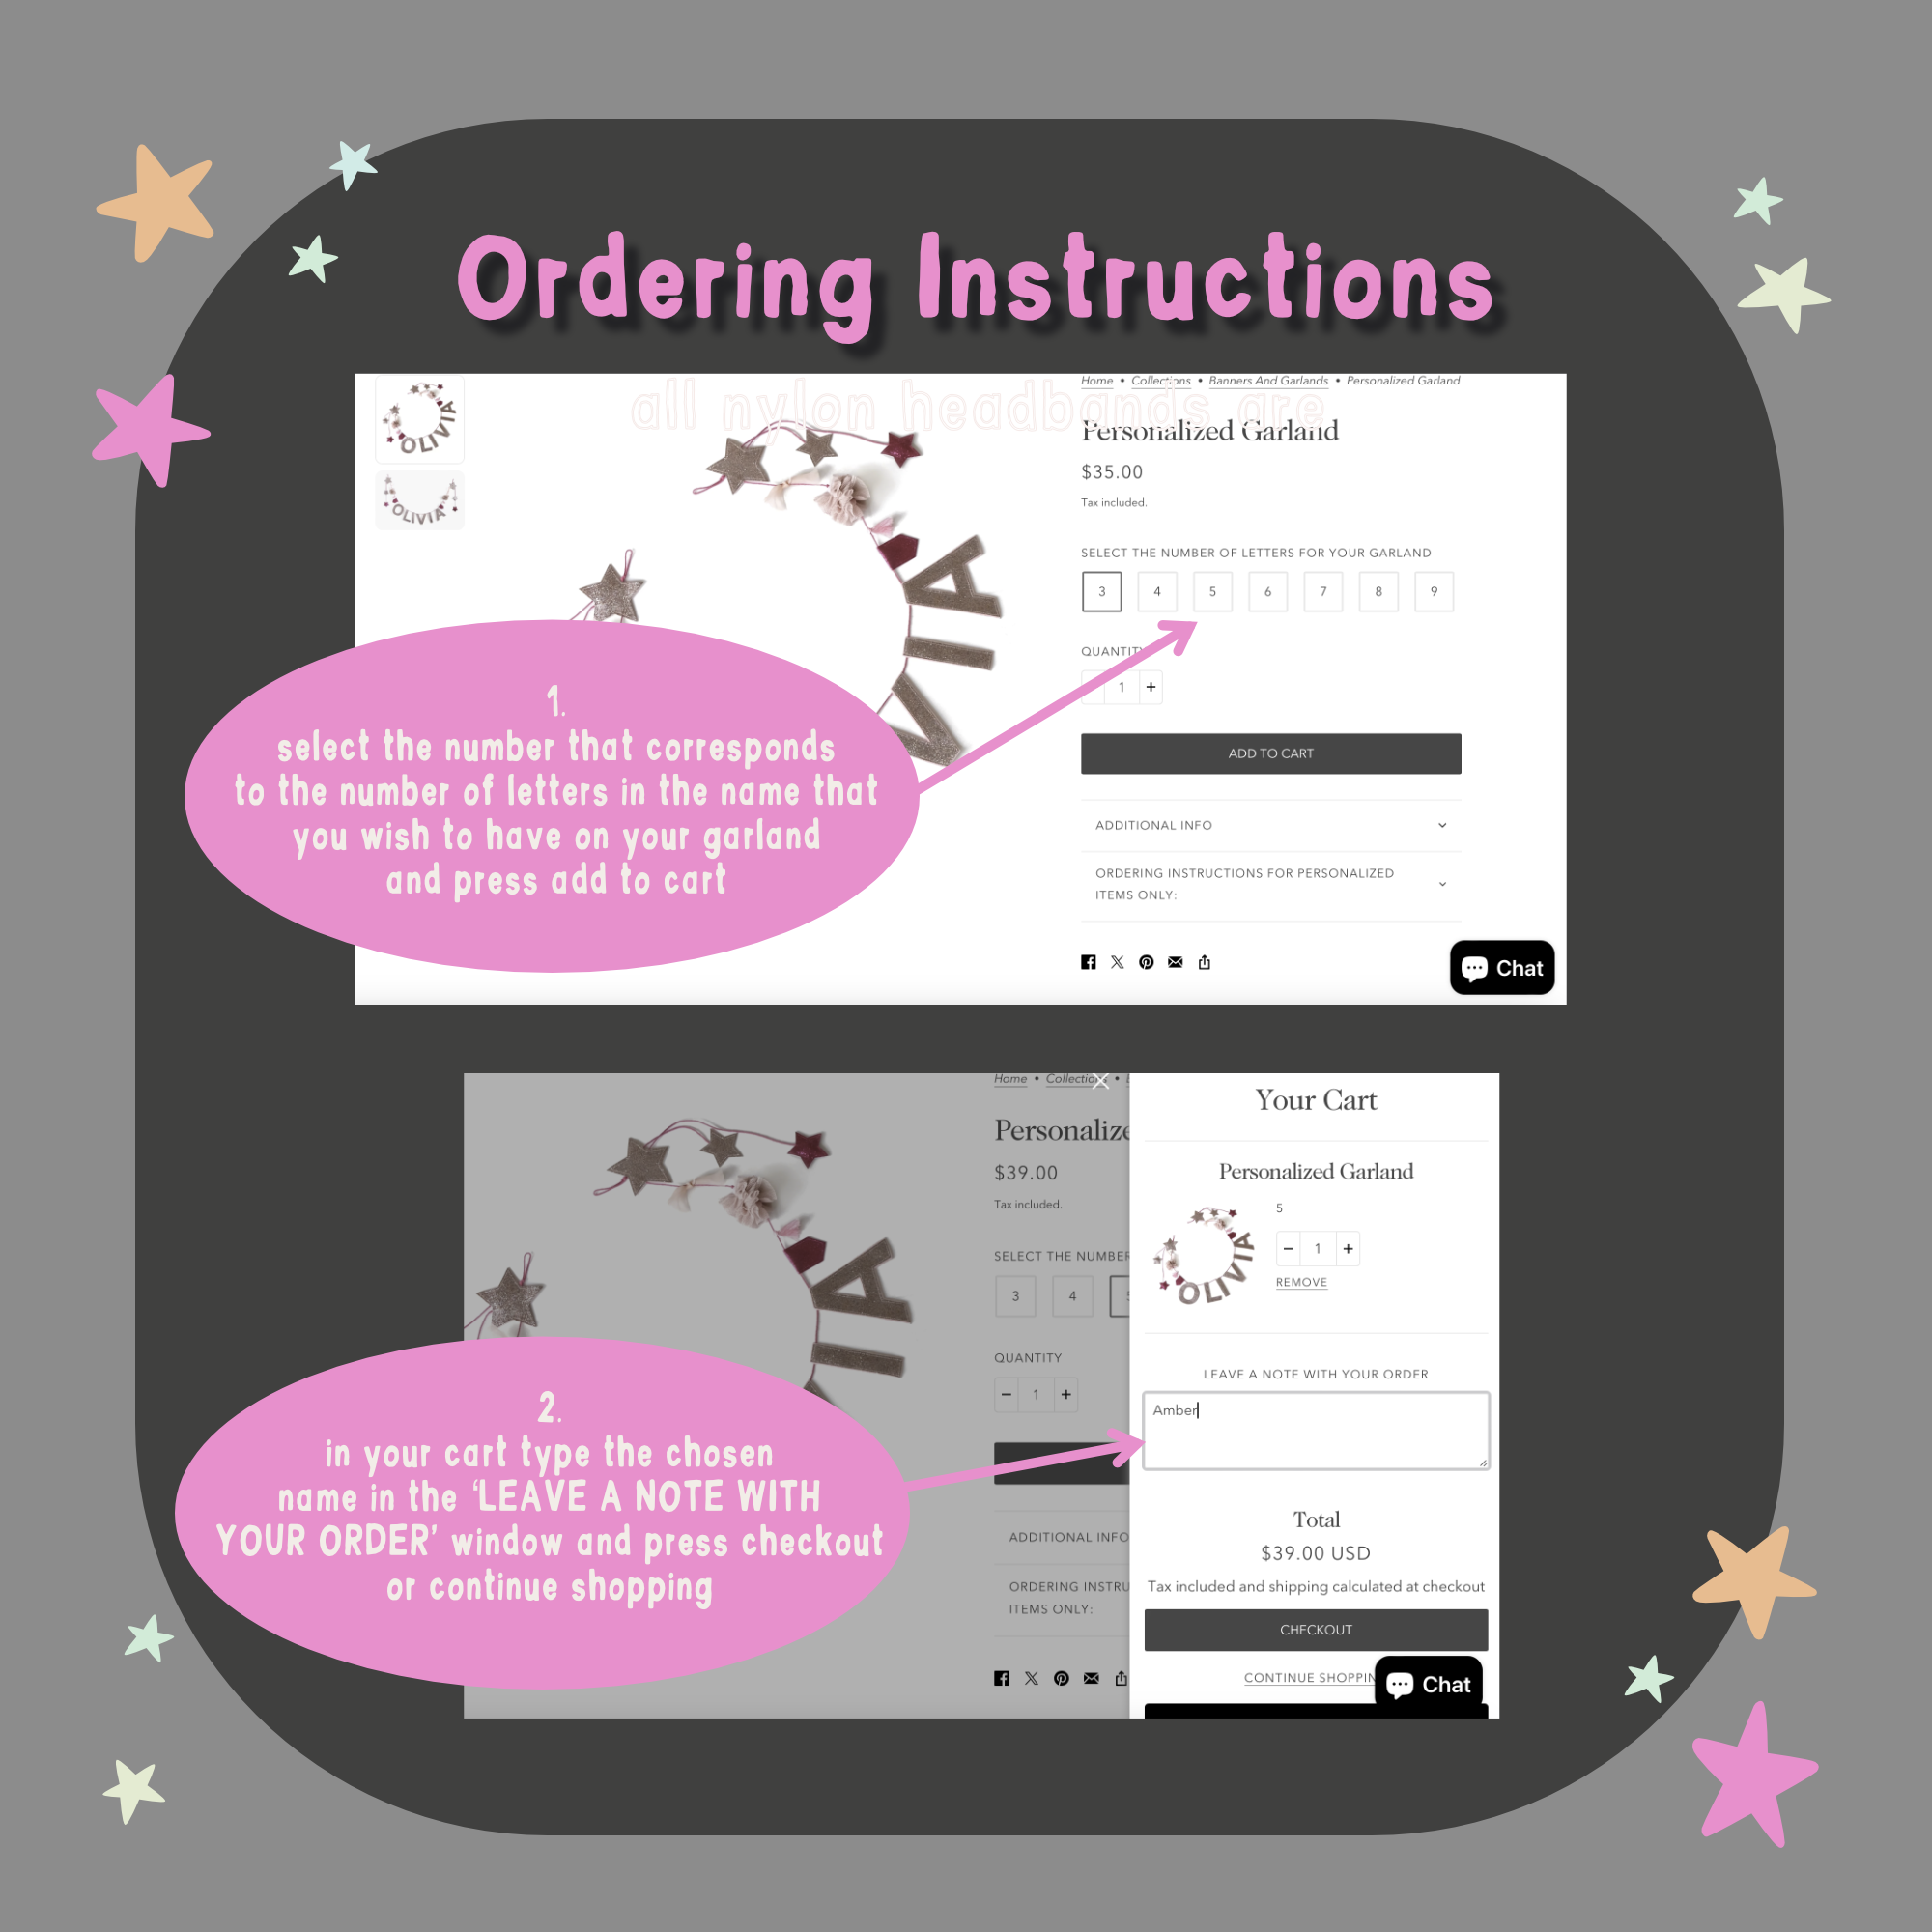 Ordering Instructions: Please select the number of letters in your chosen name from the menu and write the name down in the ‘LEAVE A NOTE WITH YOUR ORDER‘ window at checkout. See images for a pictorial instructions.